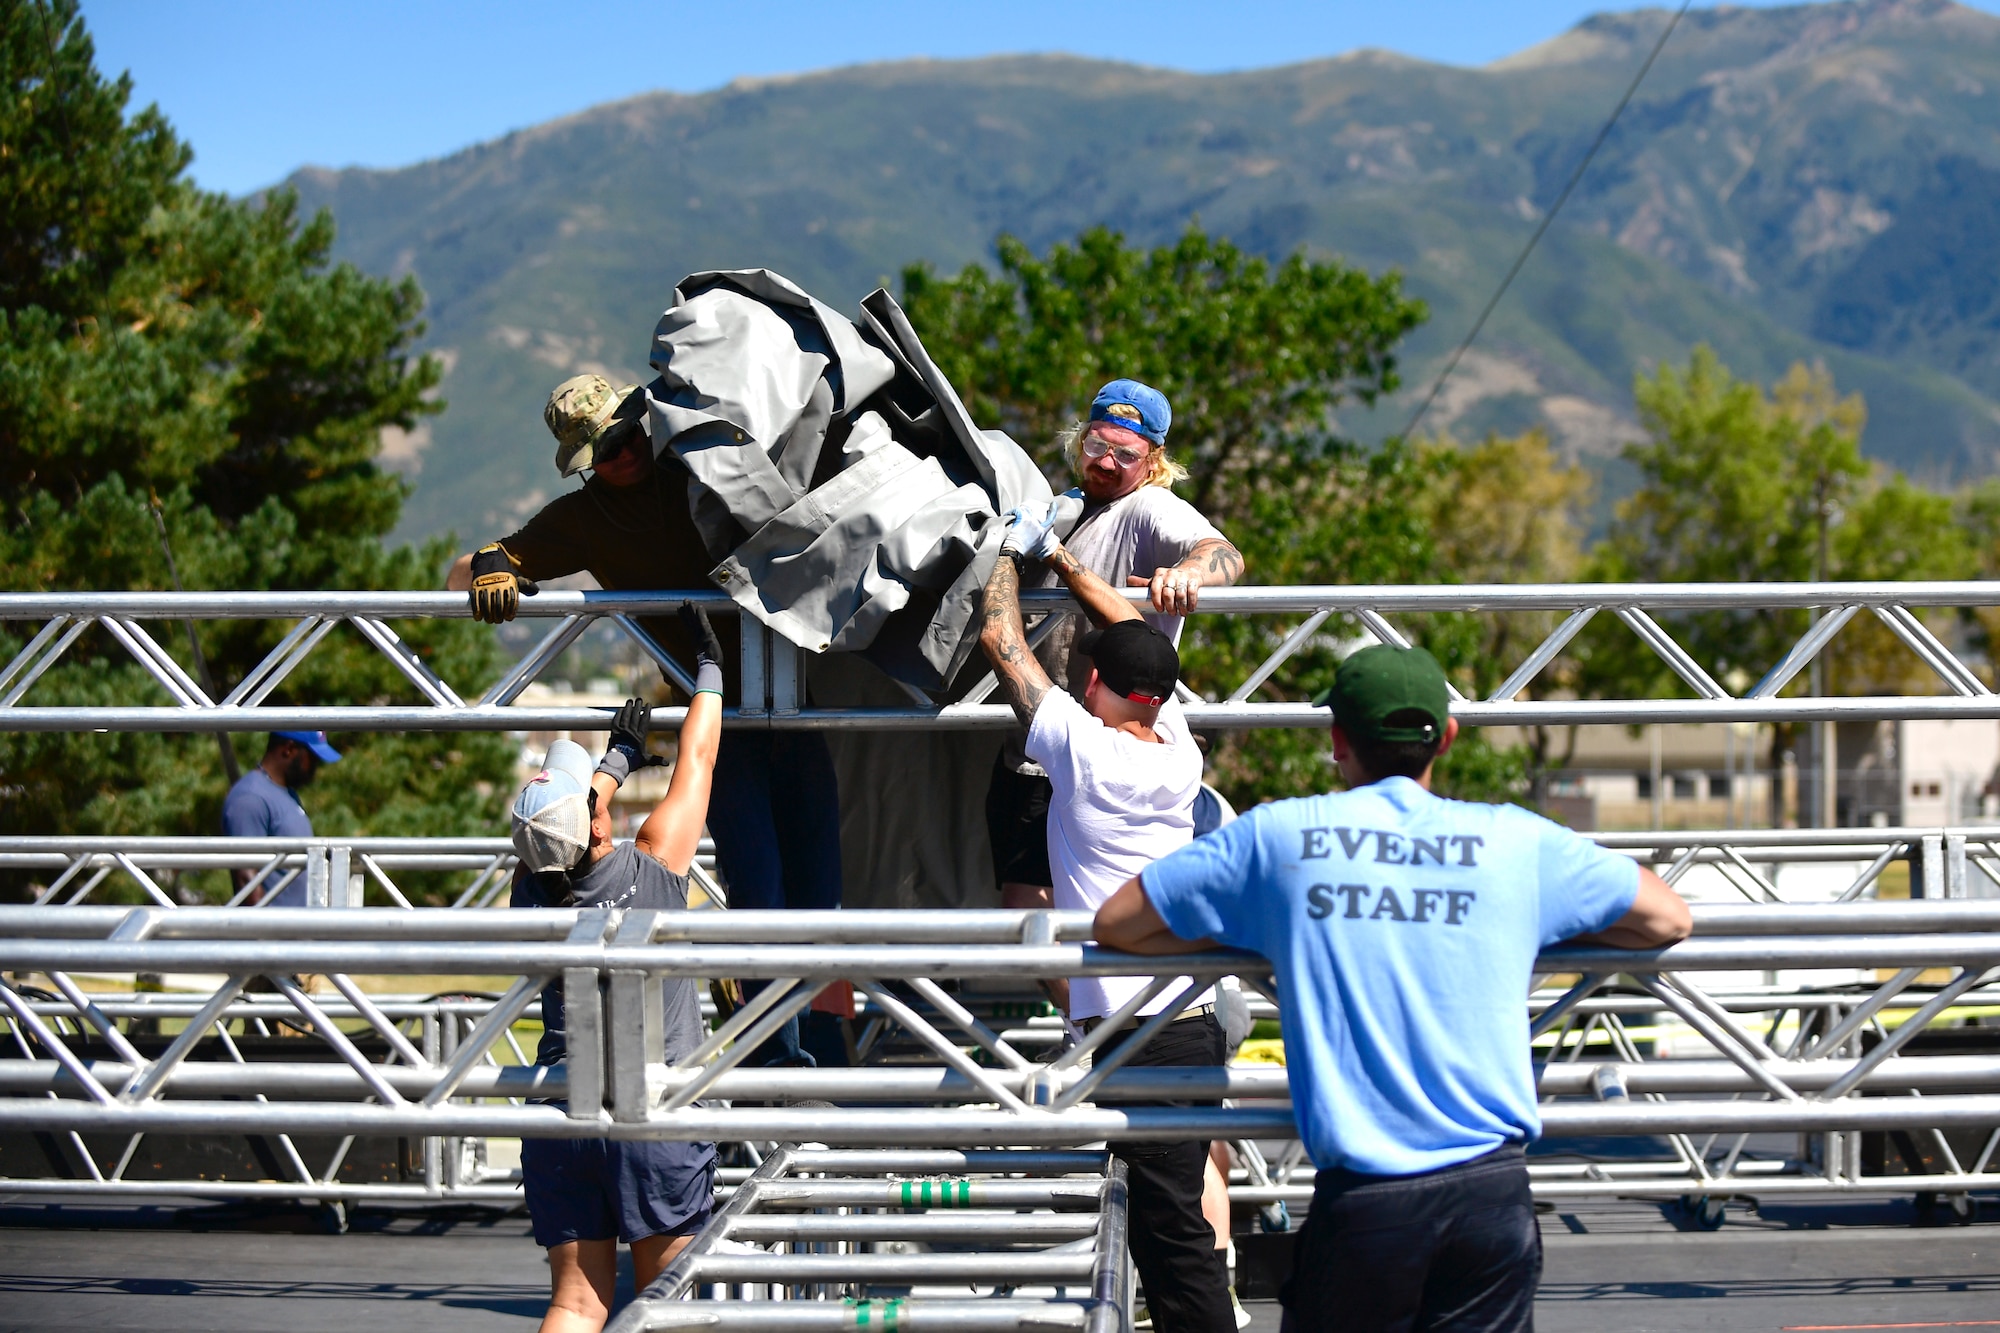 Volunteers assist Air Force Entertainment Service workers while setting up the rock festival concert stage Aug. 26, 2022, at Hill Air Force Base, Utah. The annual concert is held to boost morale and resiliency for the military and civilian workforce and their families, and was coordinated by the 75th Force Support Squadron through the Air Force Entertainment Service. (U.S. Air Force photo by Todd Cromar)